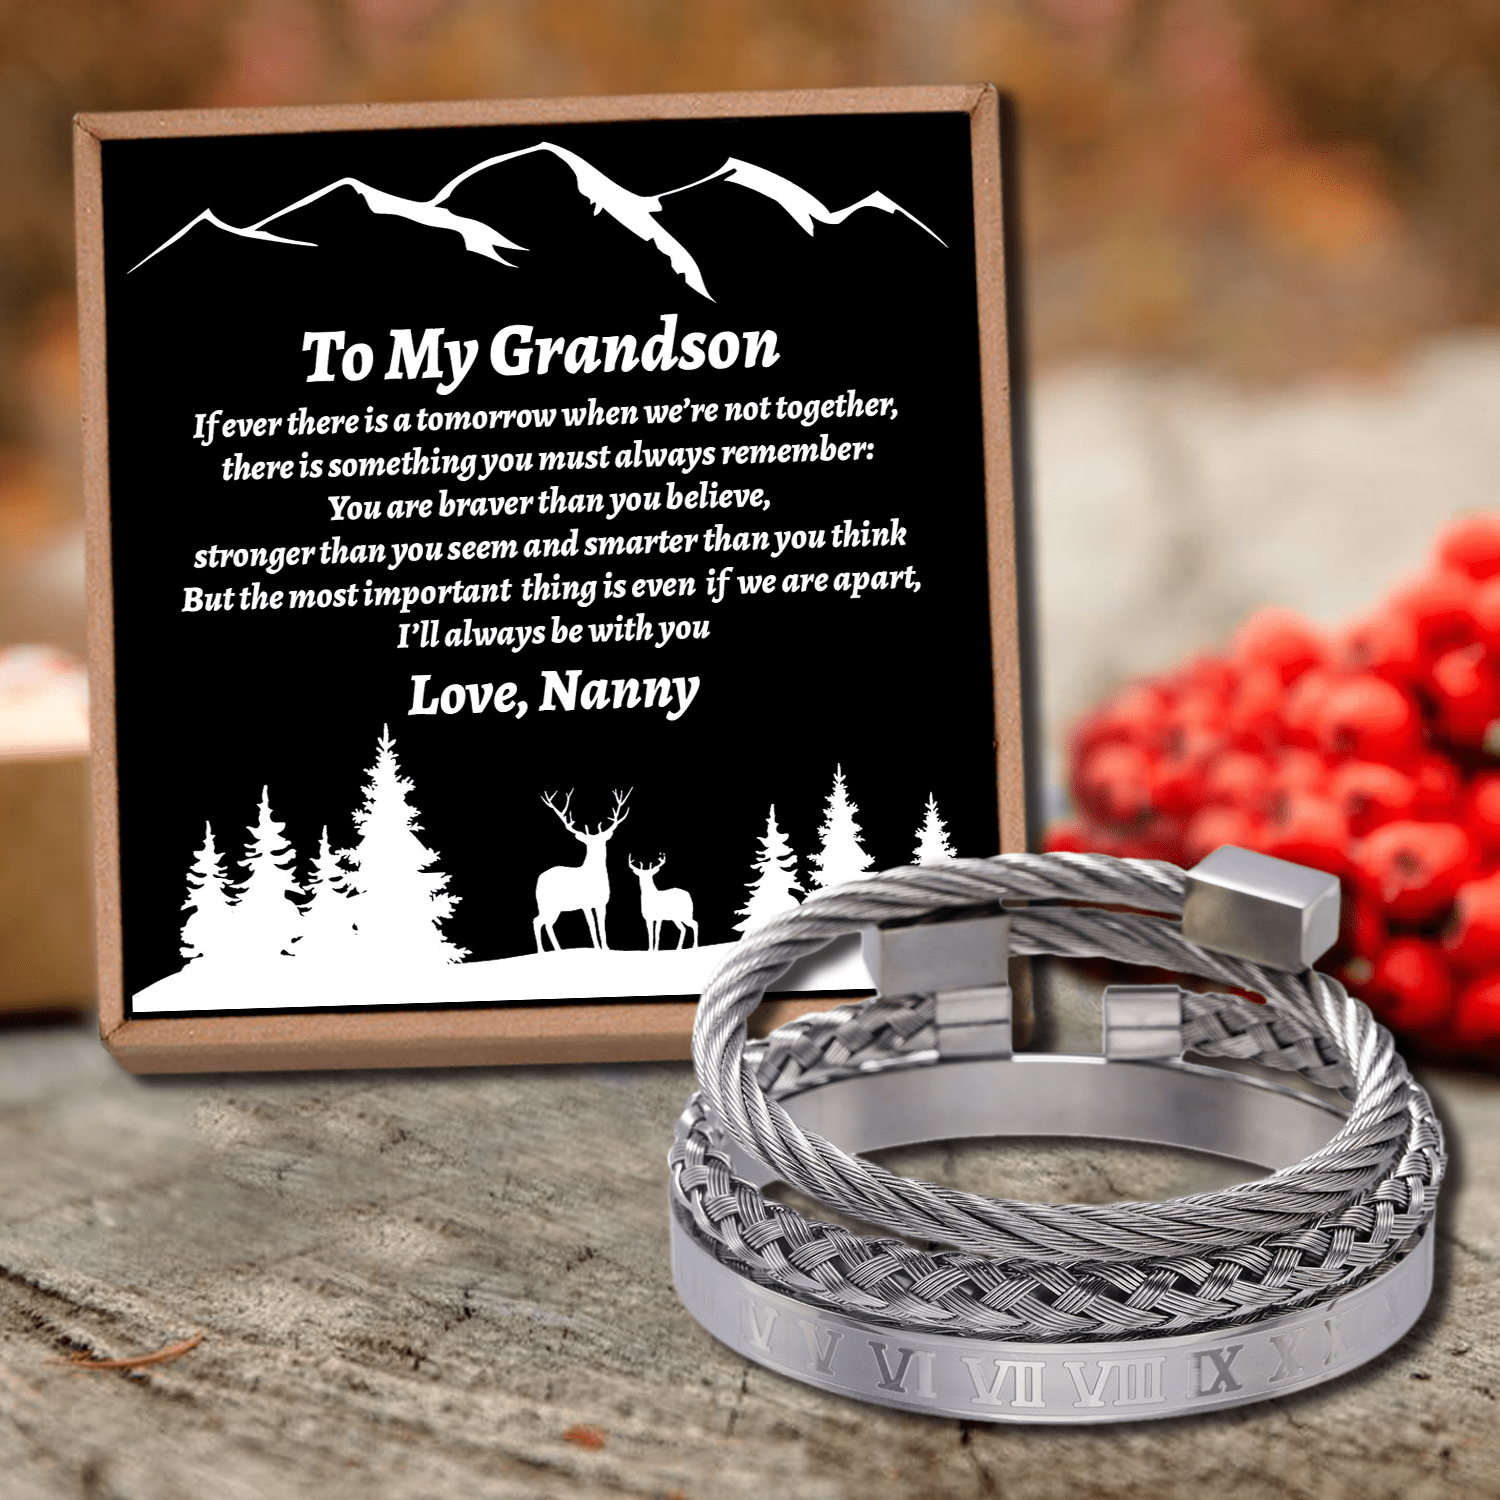 Bracelets Nanny To Grandson - I Will Always Be With You Roman Numeral Bracelet Set GiveMe-Gifts